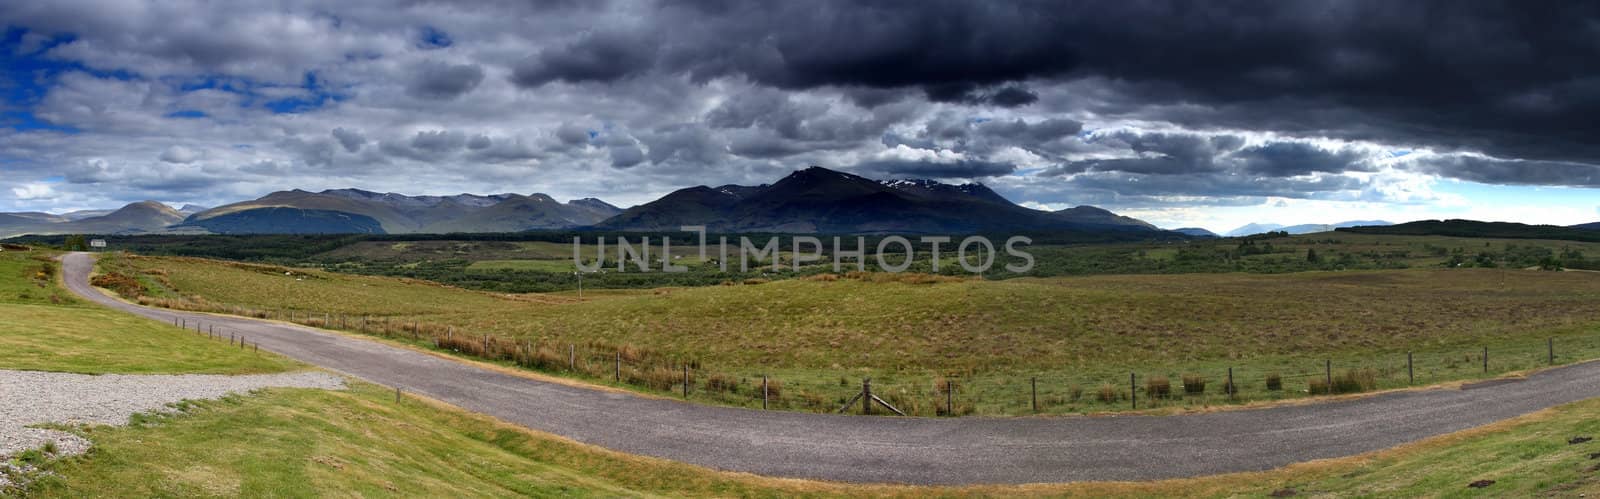 Panoramic of Ben Nevis Mountain Range by olliemt